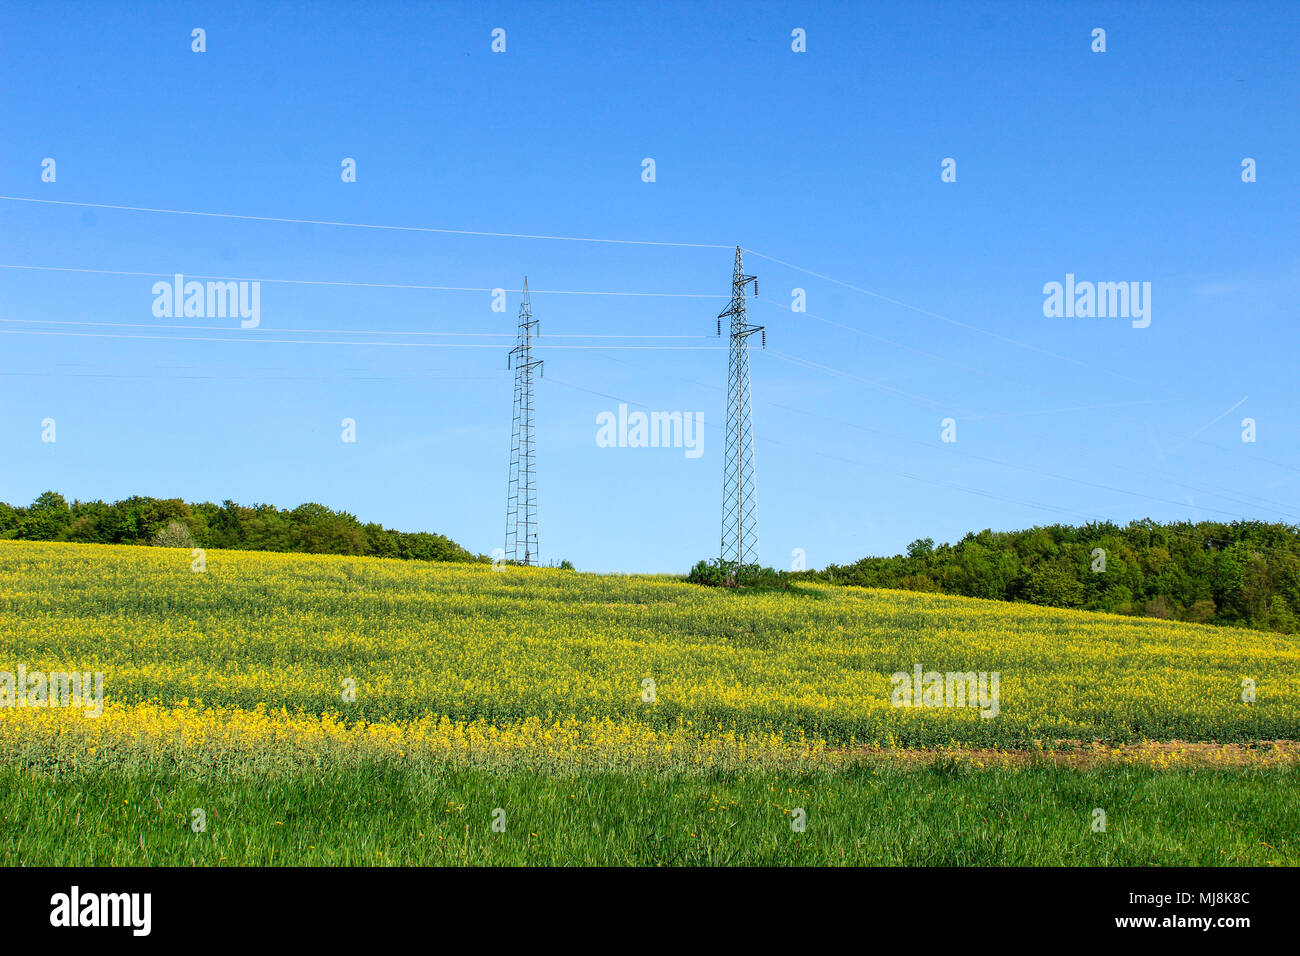 Powerline towers in a yellow flower field Stock Photo